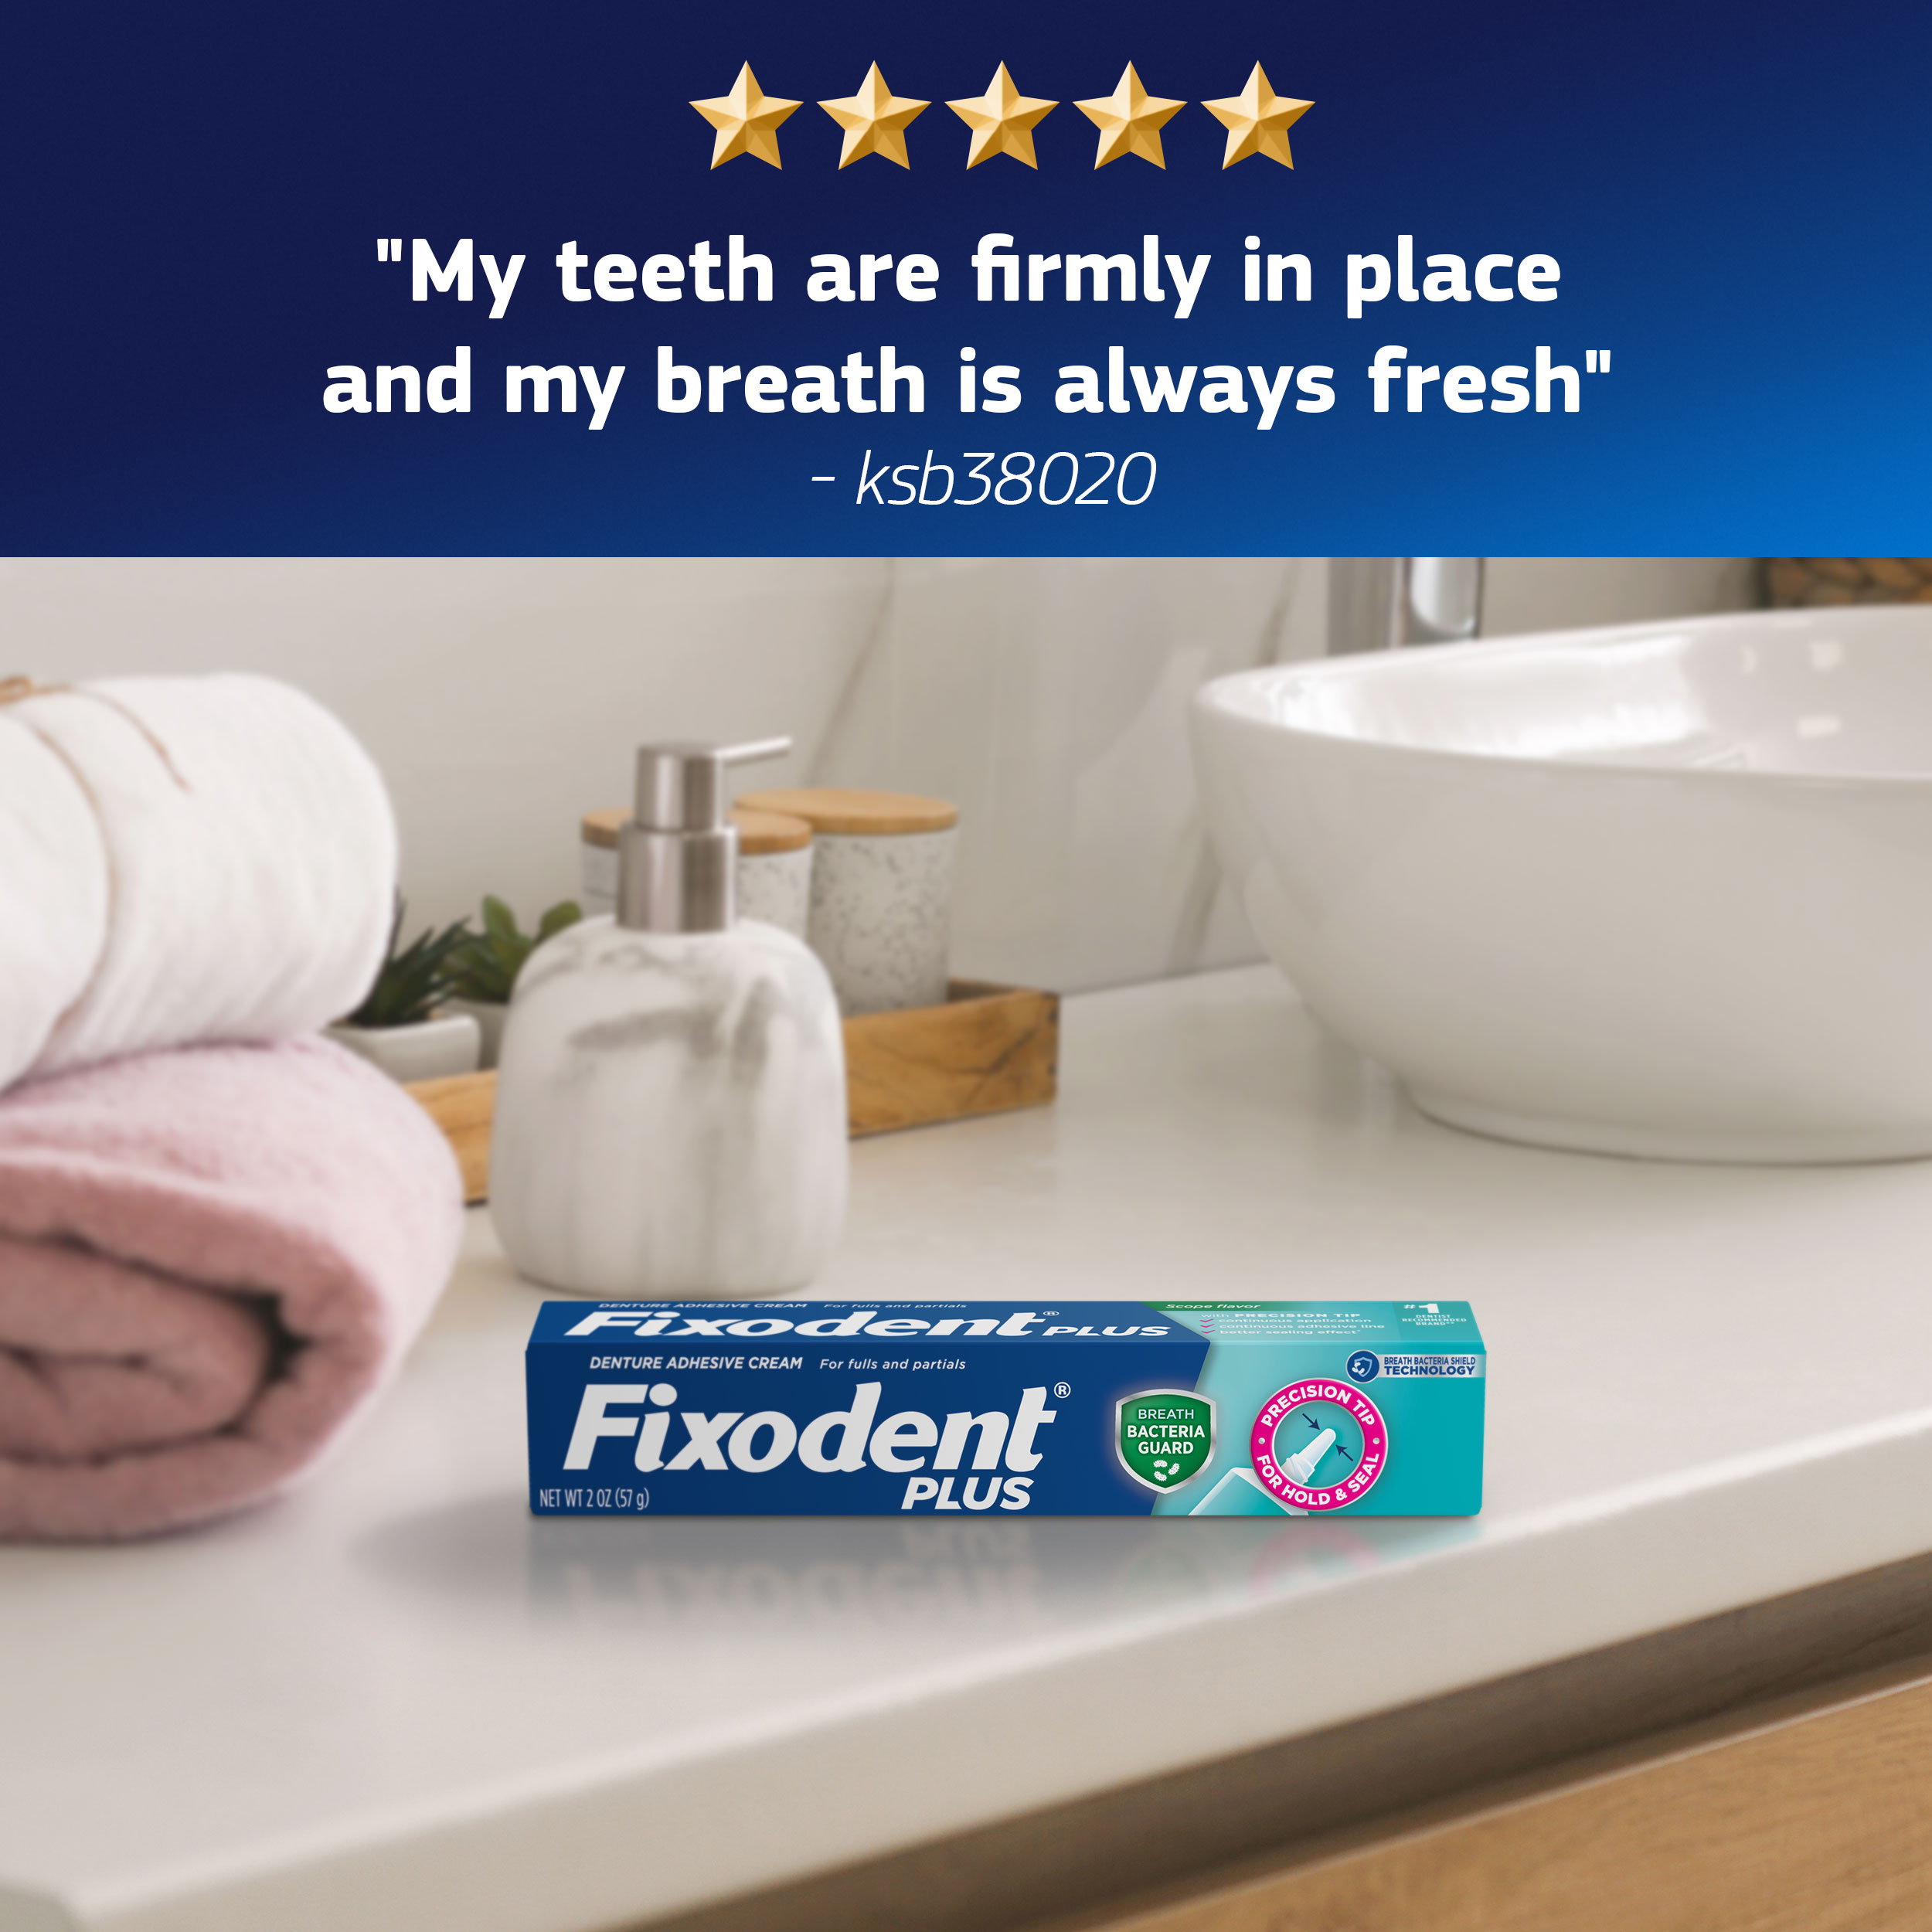 Fixodent Plus Bacteria Guard - product review